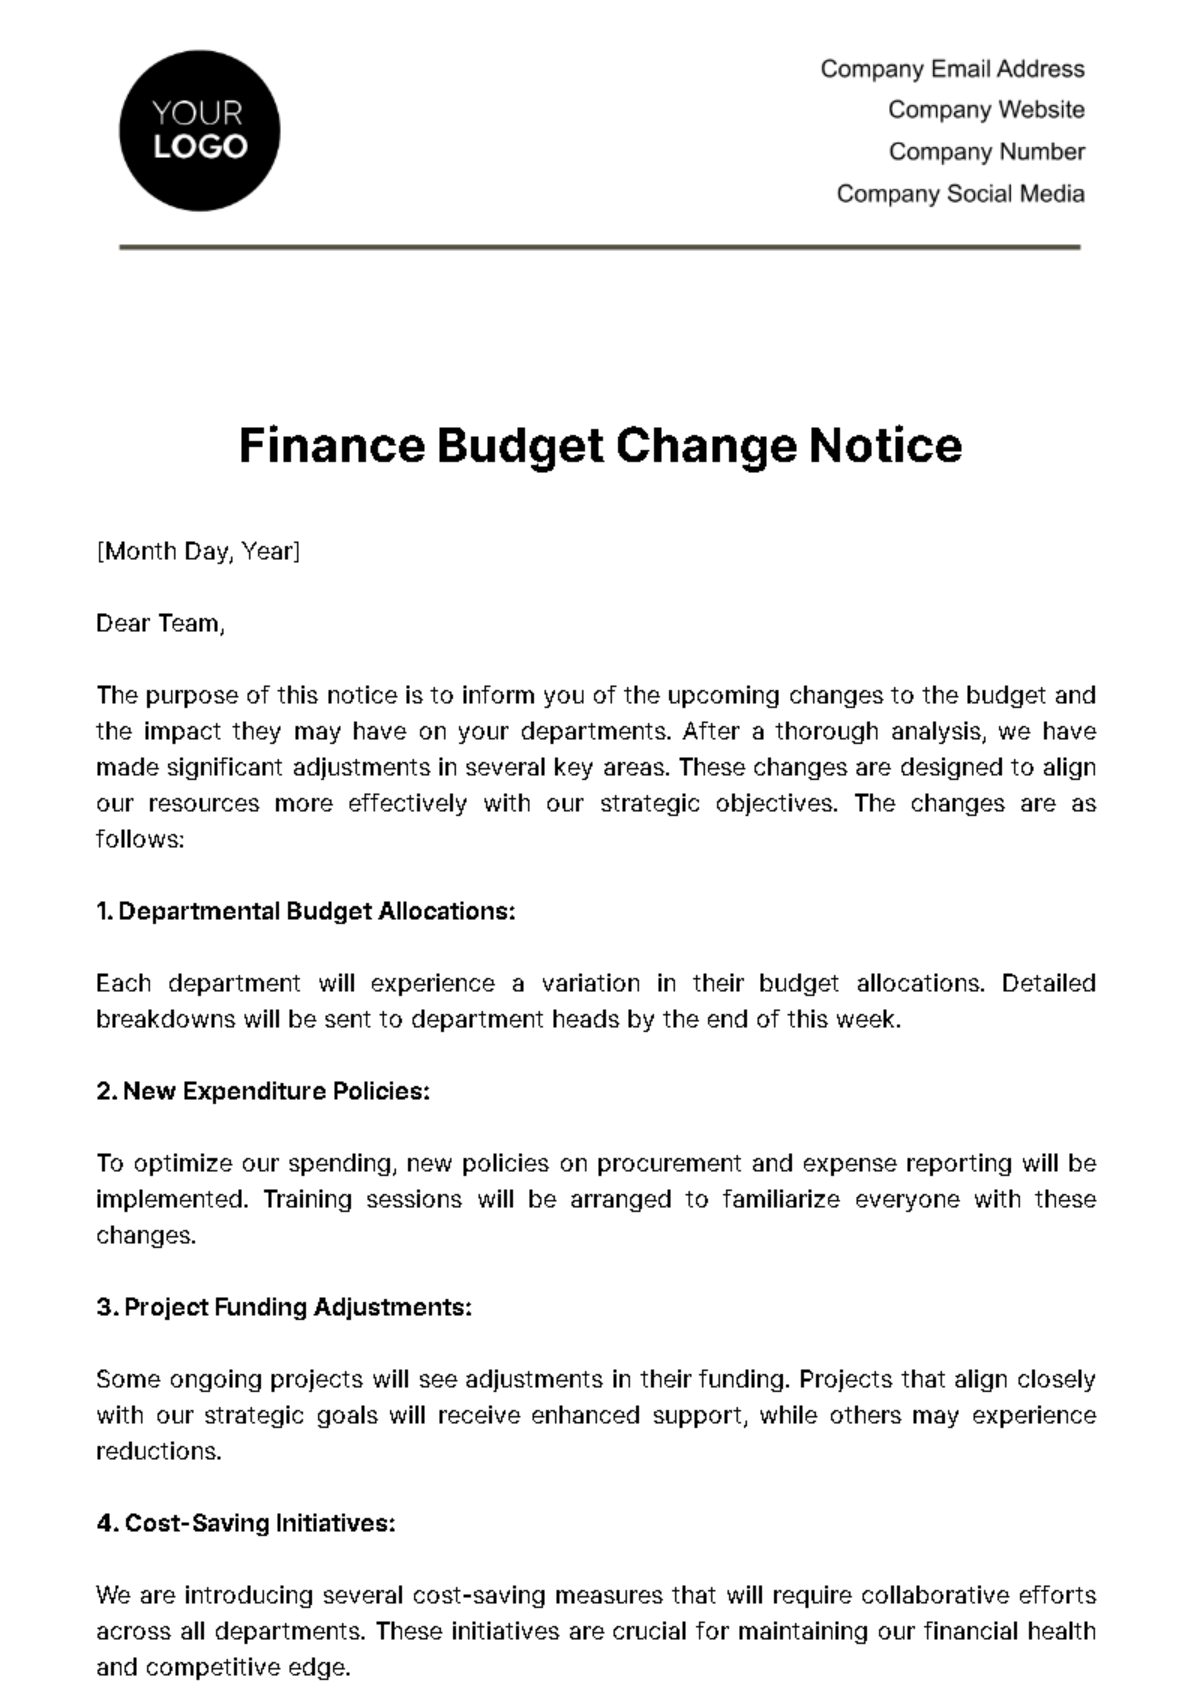 Free Finance Budget Change Notice Template